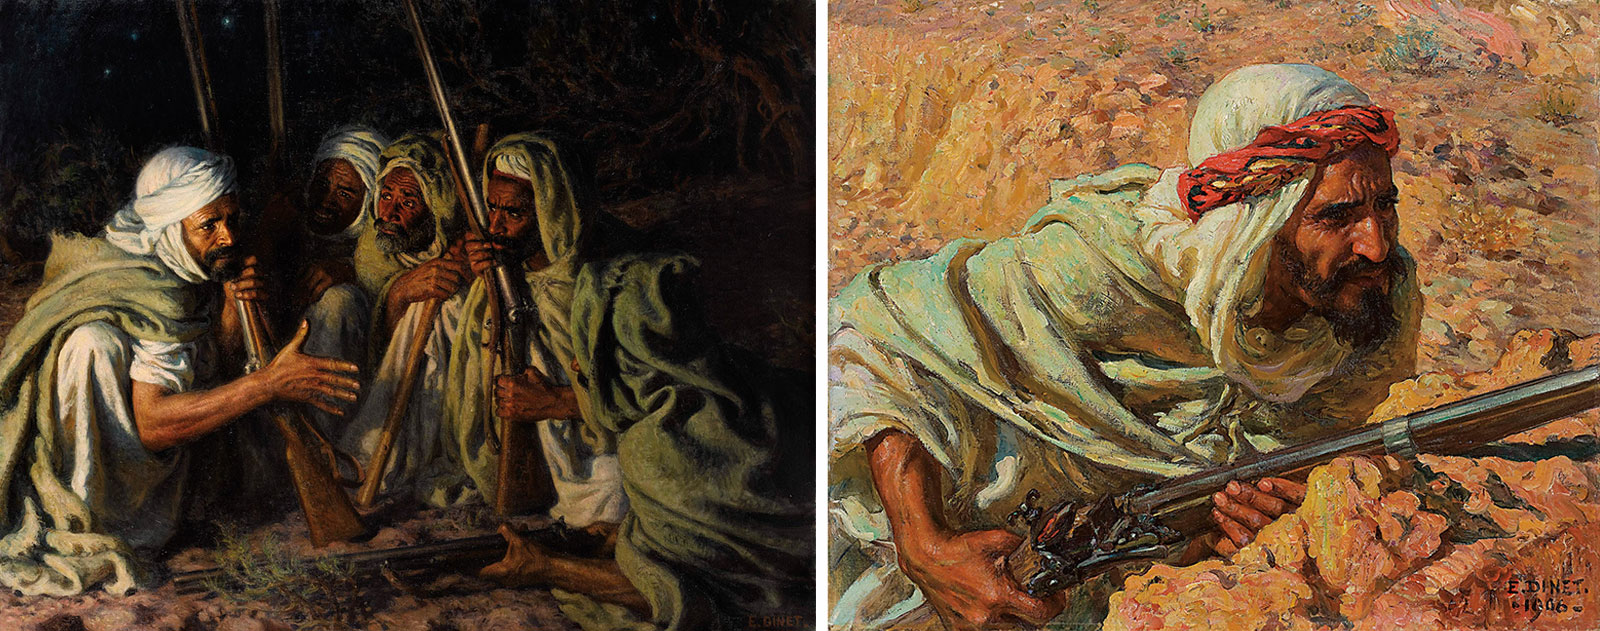 In two other paintings among the nine by Dinet that Gabr has acquired, “Council in the Night,” 1905, left, and “The Lookout,” right, evoke both the wariness and commitment of Algerian men resisting French colonial occupation. Dinet’s cultural engagement, Gabr wrote, afforded his Western viewers “a profound understanding of a culture so different from their own.”